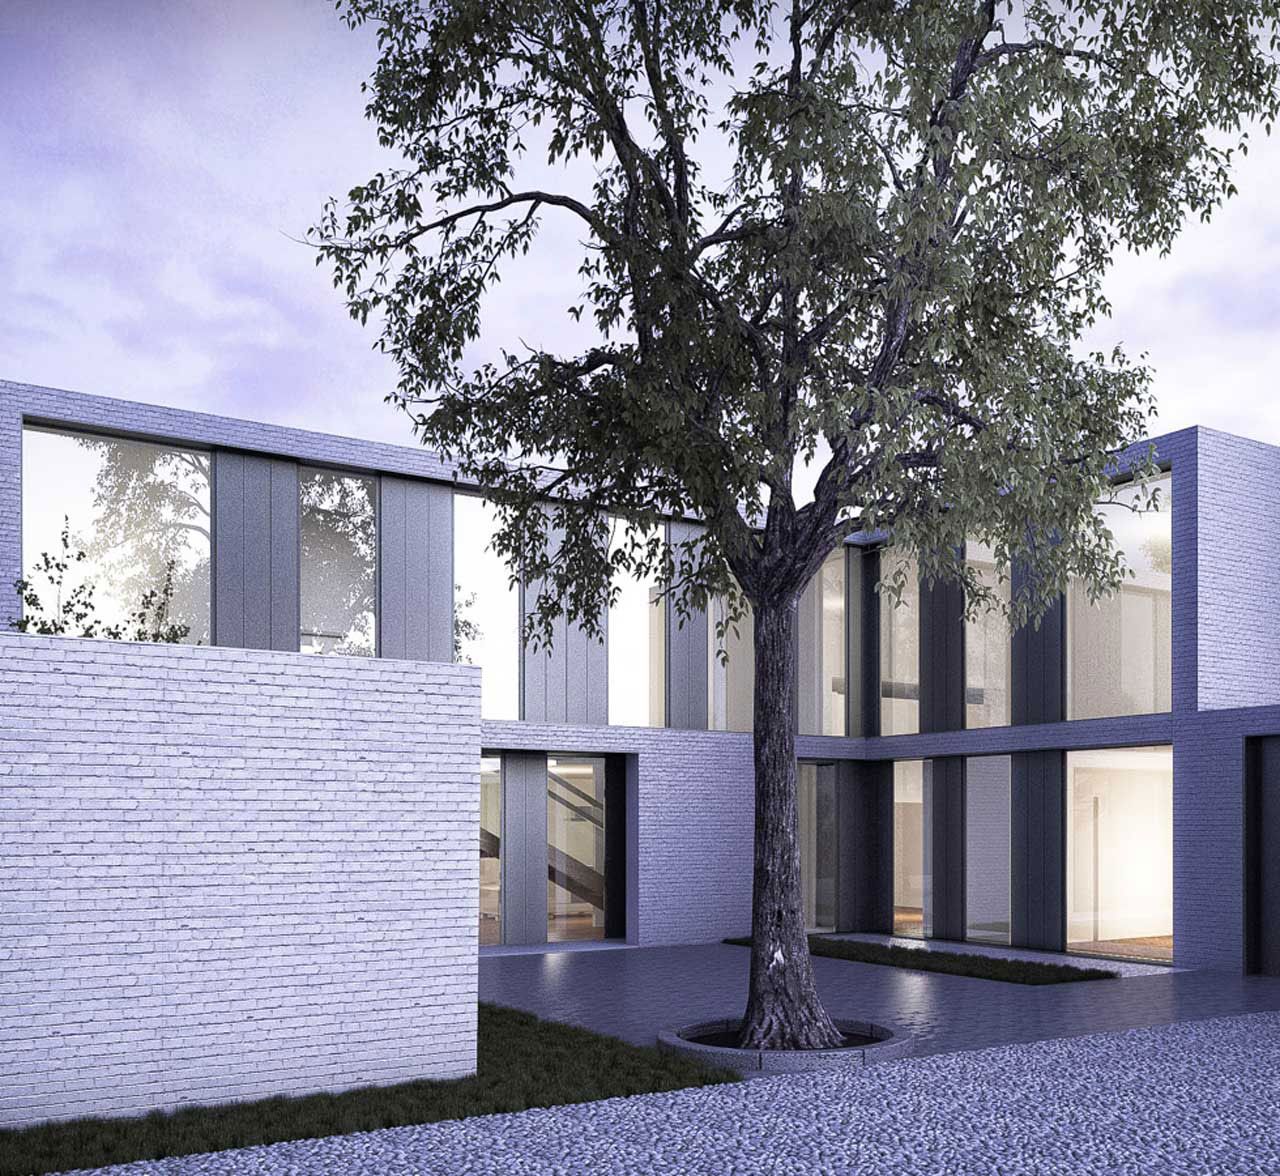 Exterior view of the design for Backland in new dwelling, 'London' with a tree in centre of the yard.